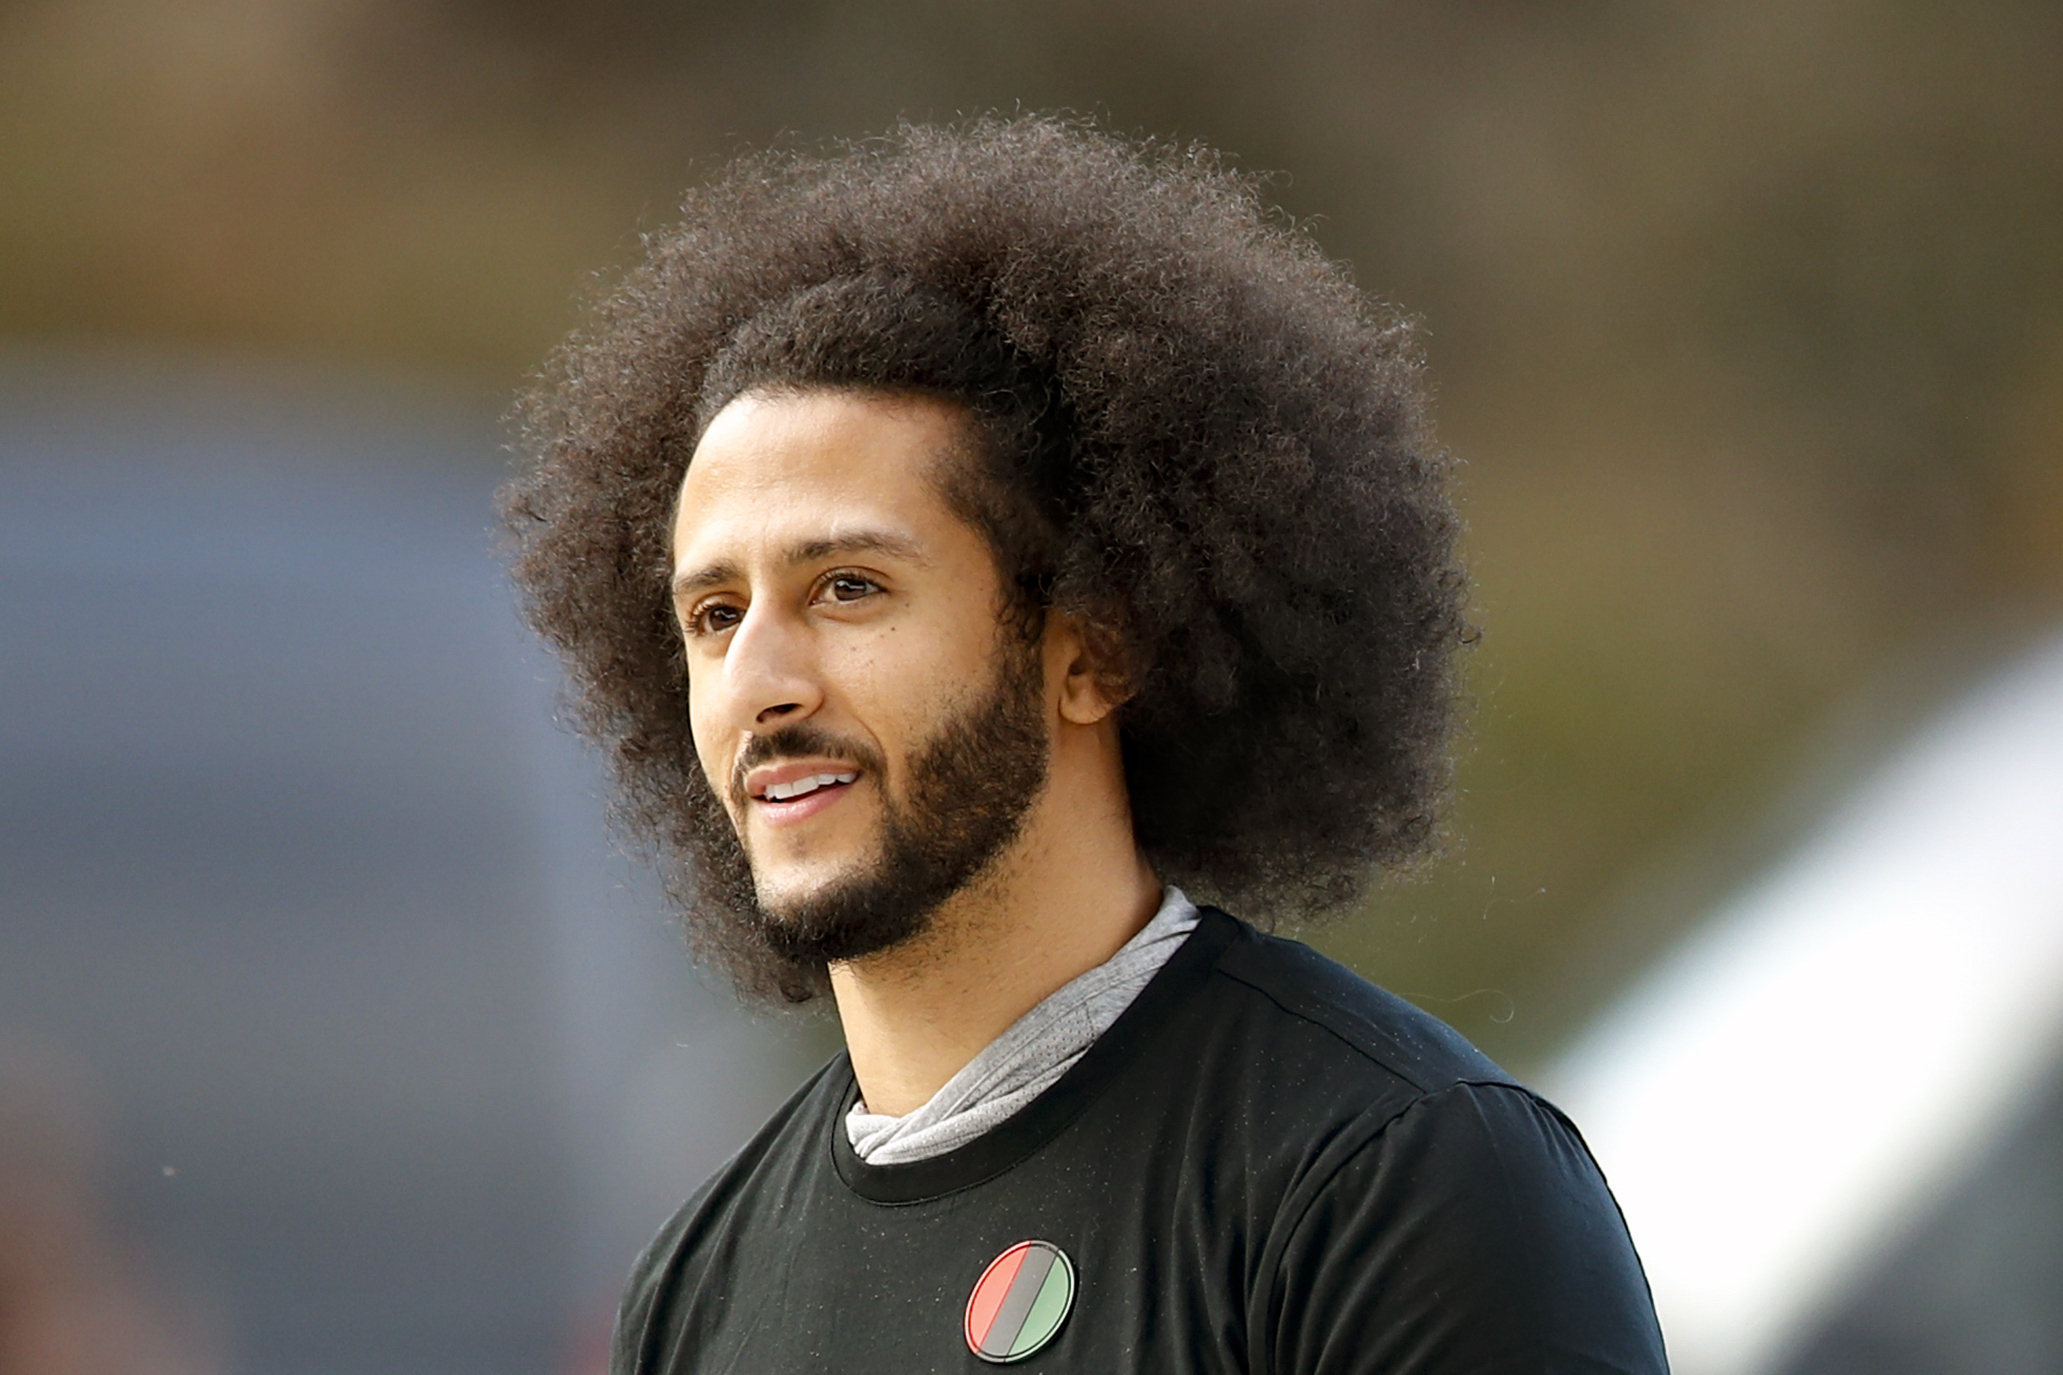 Free Colin Kaepernick - I am not going to stand up to show pride